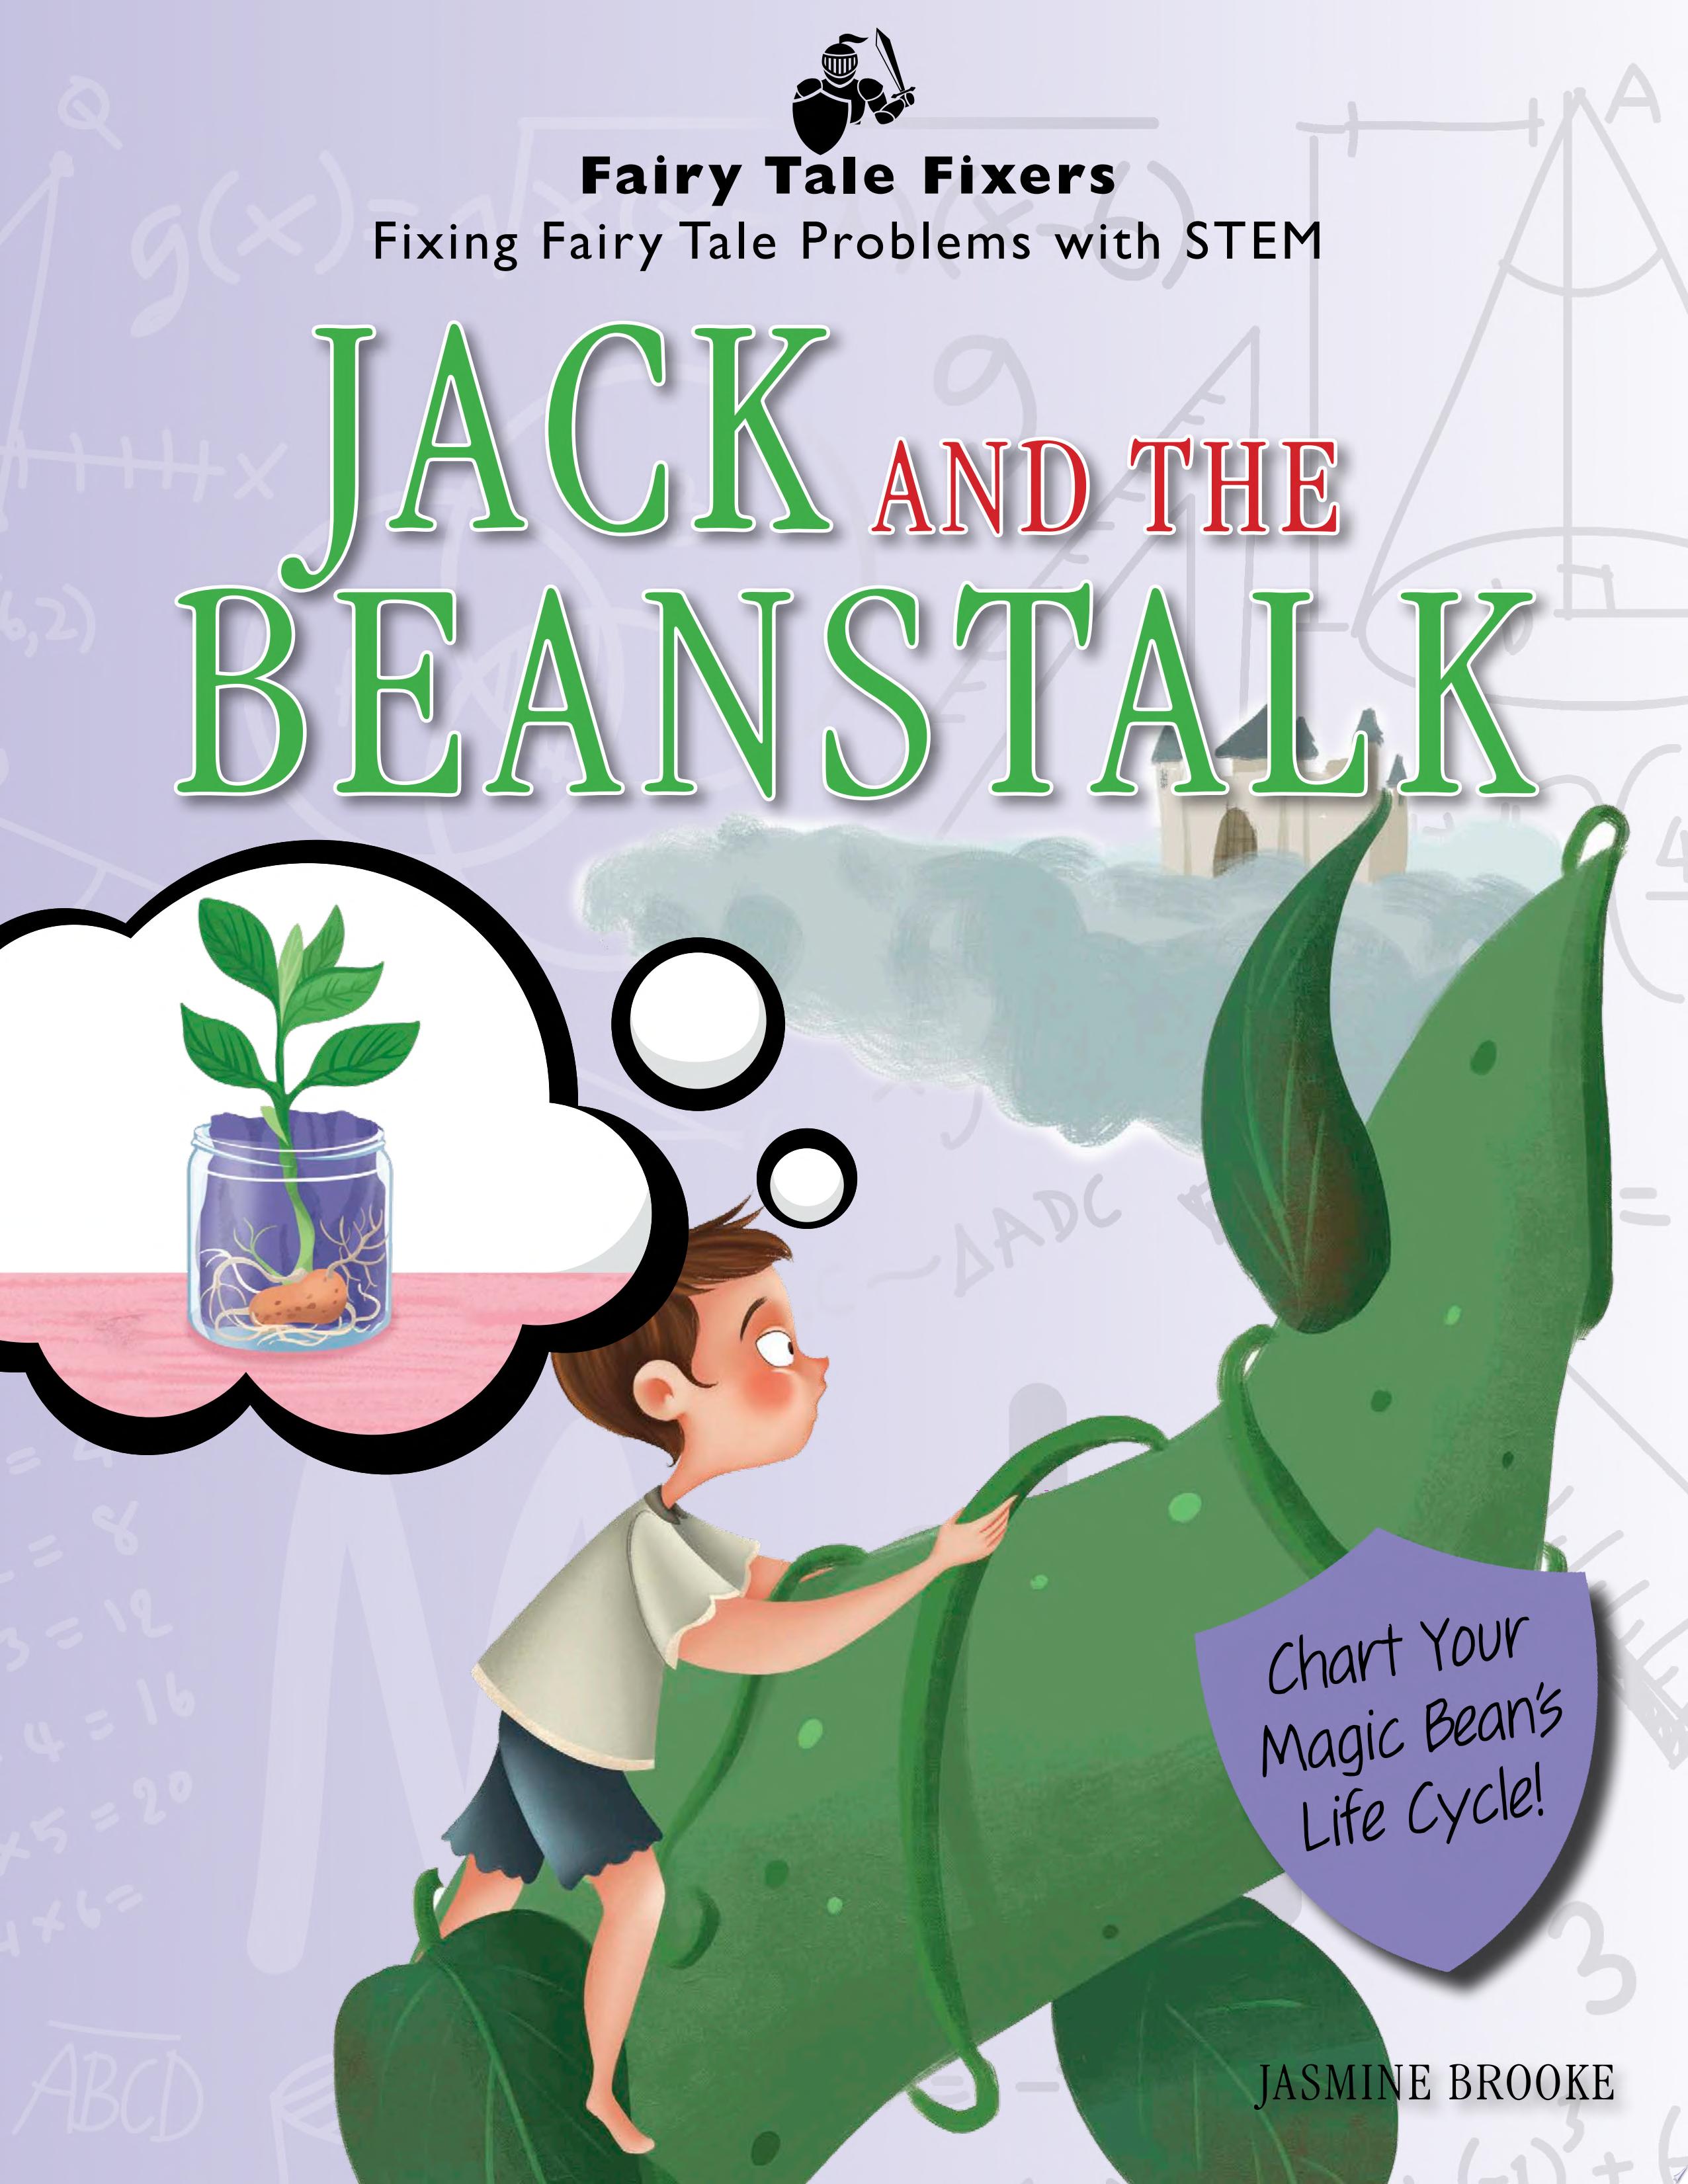 Image for "Jack and the Beanstalk"